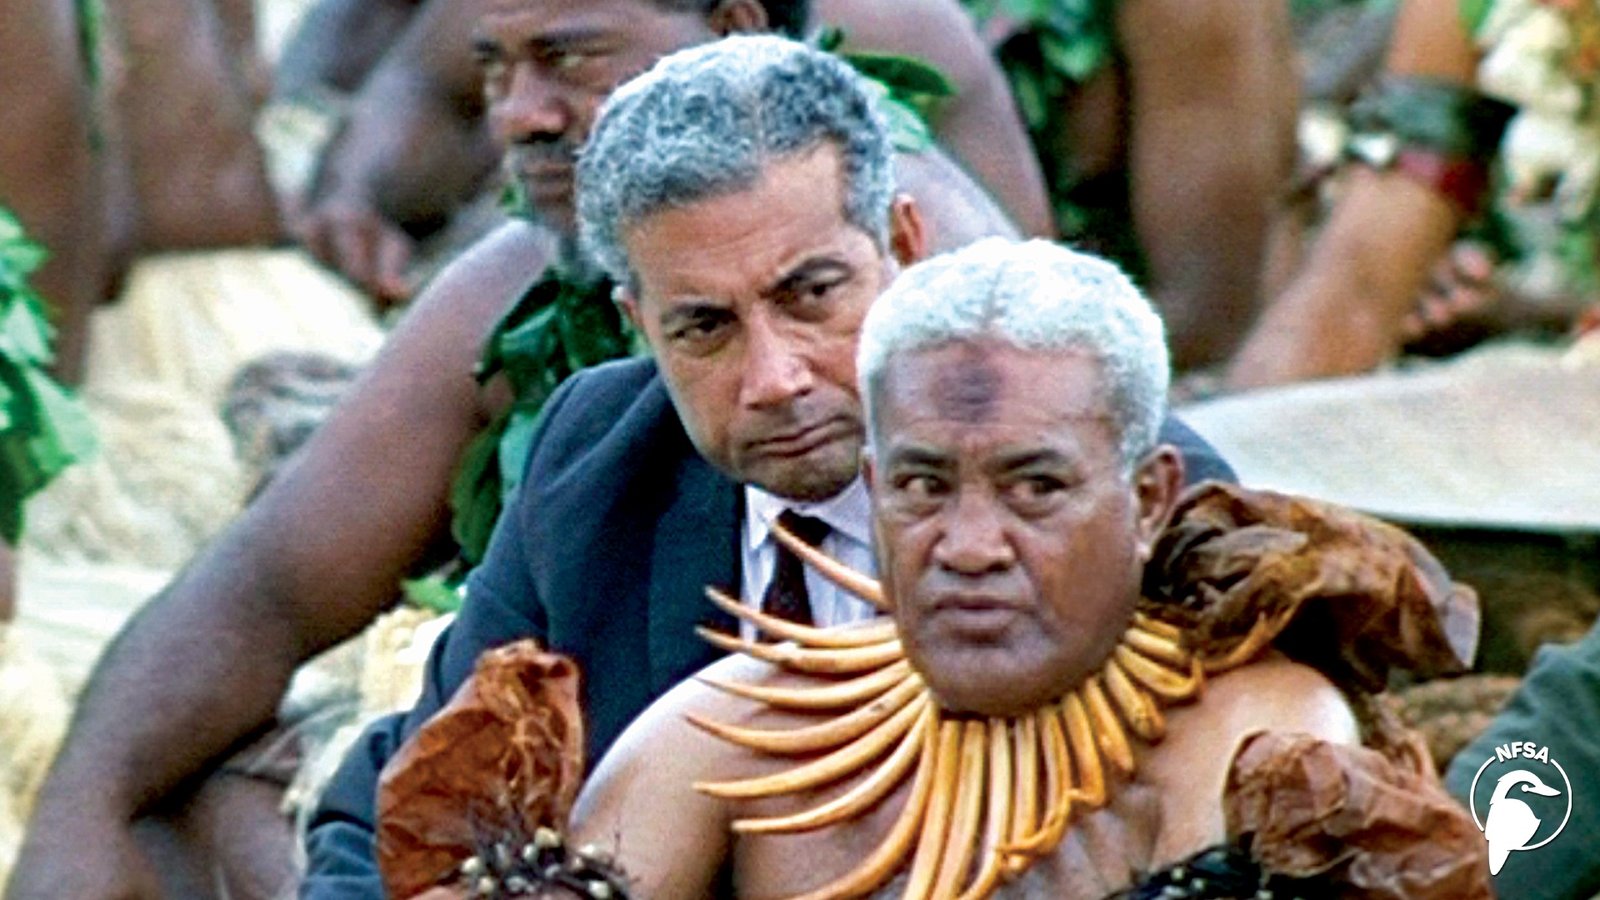 Independence for Fiji